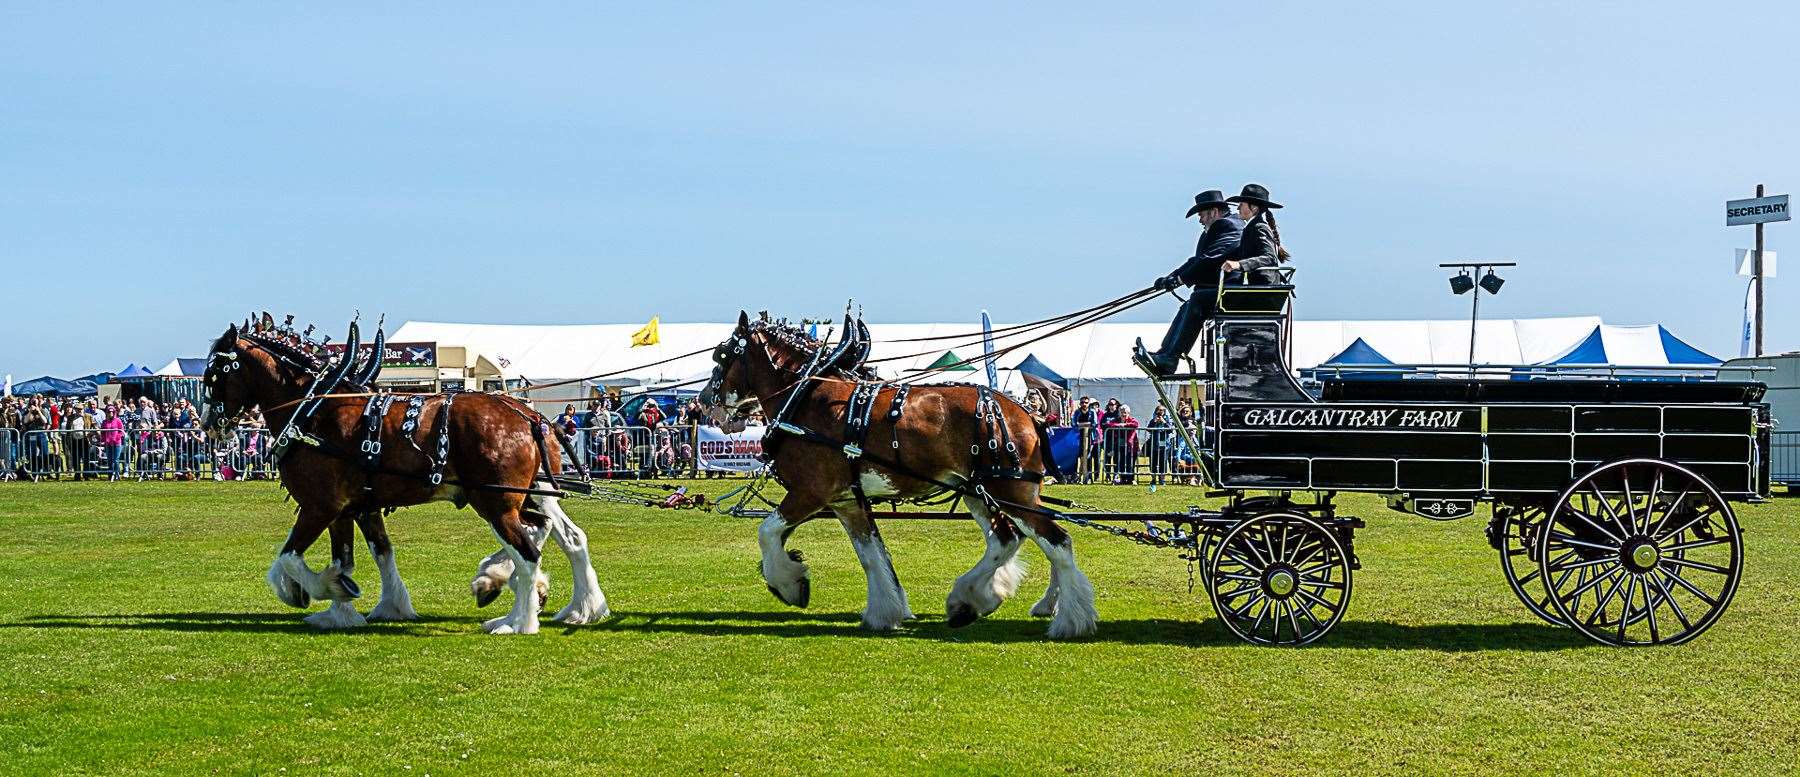 Display by Galcantray Clydesdales. Photo: East Sutherland Camera Club